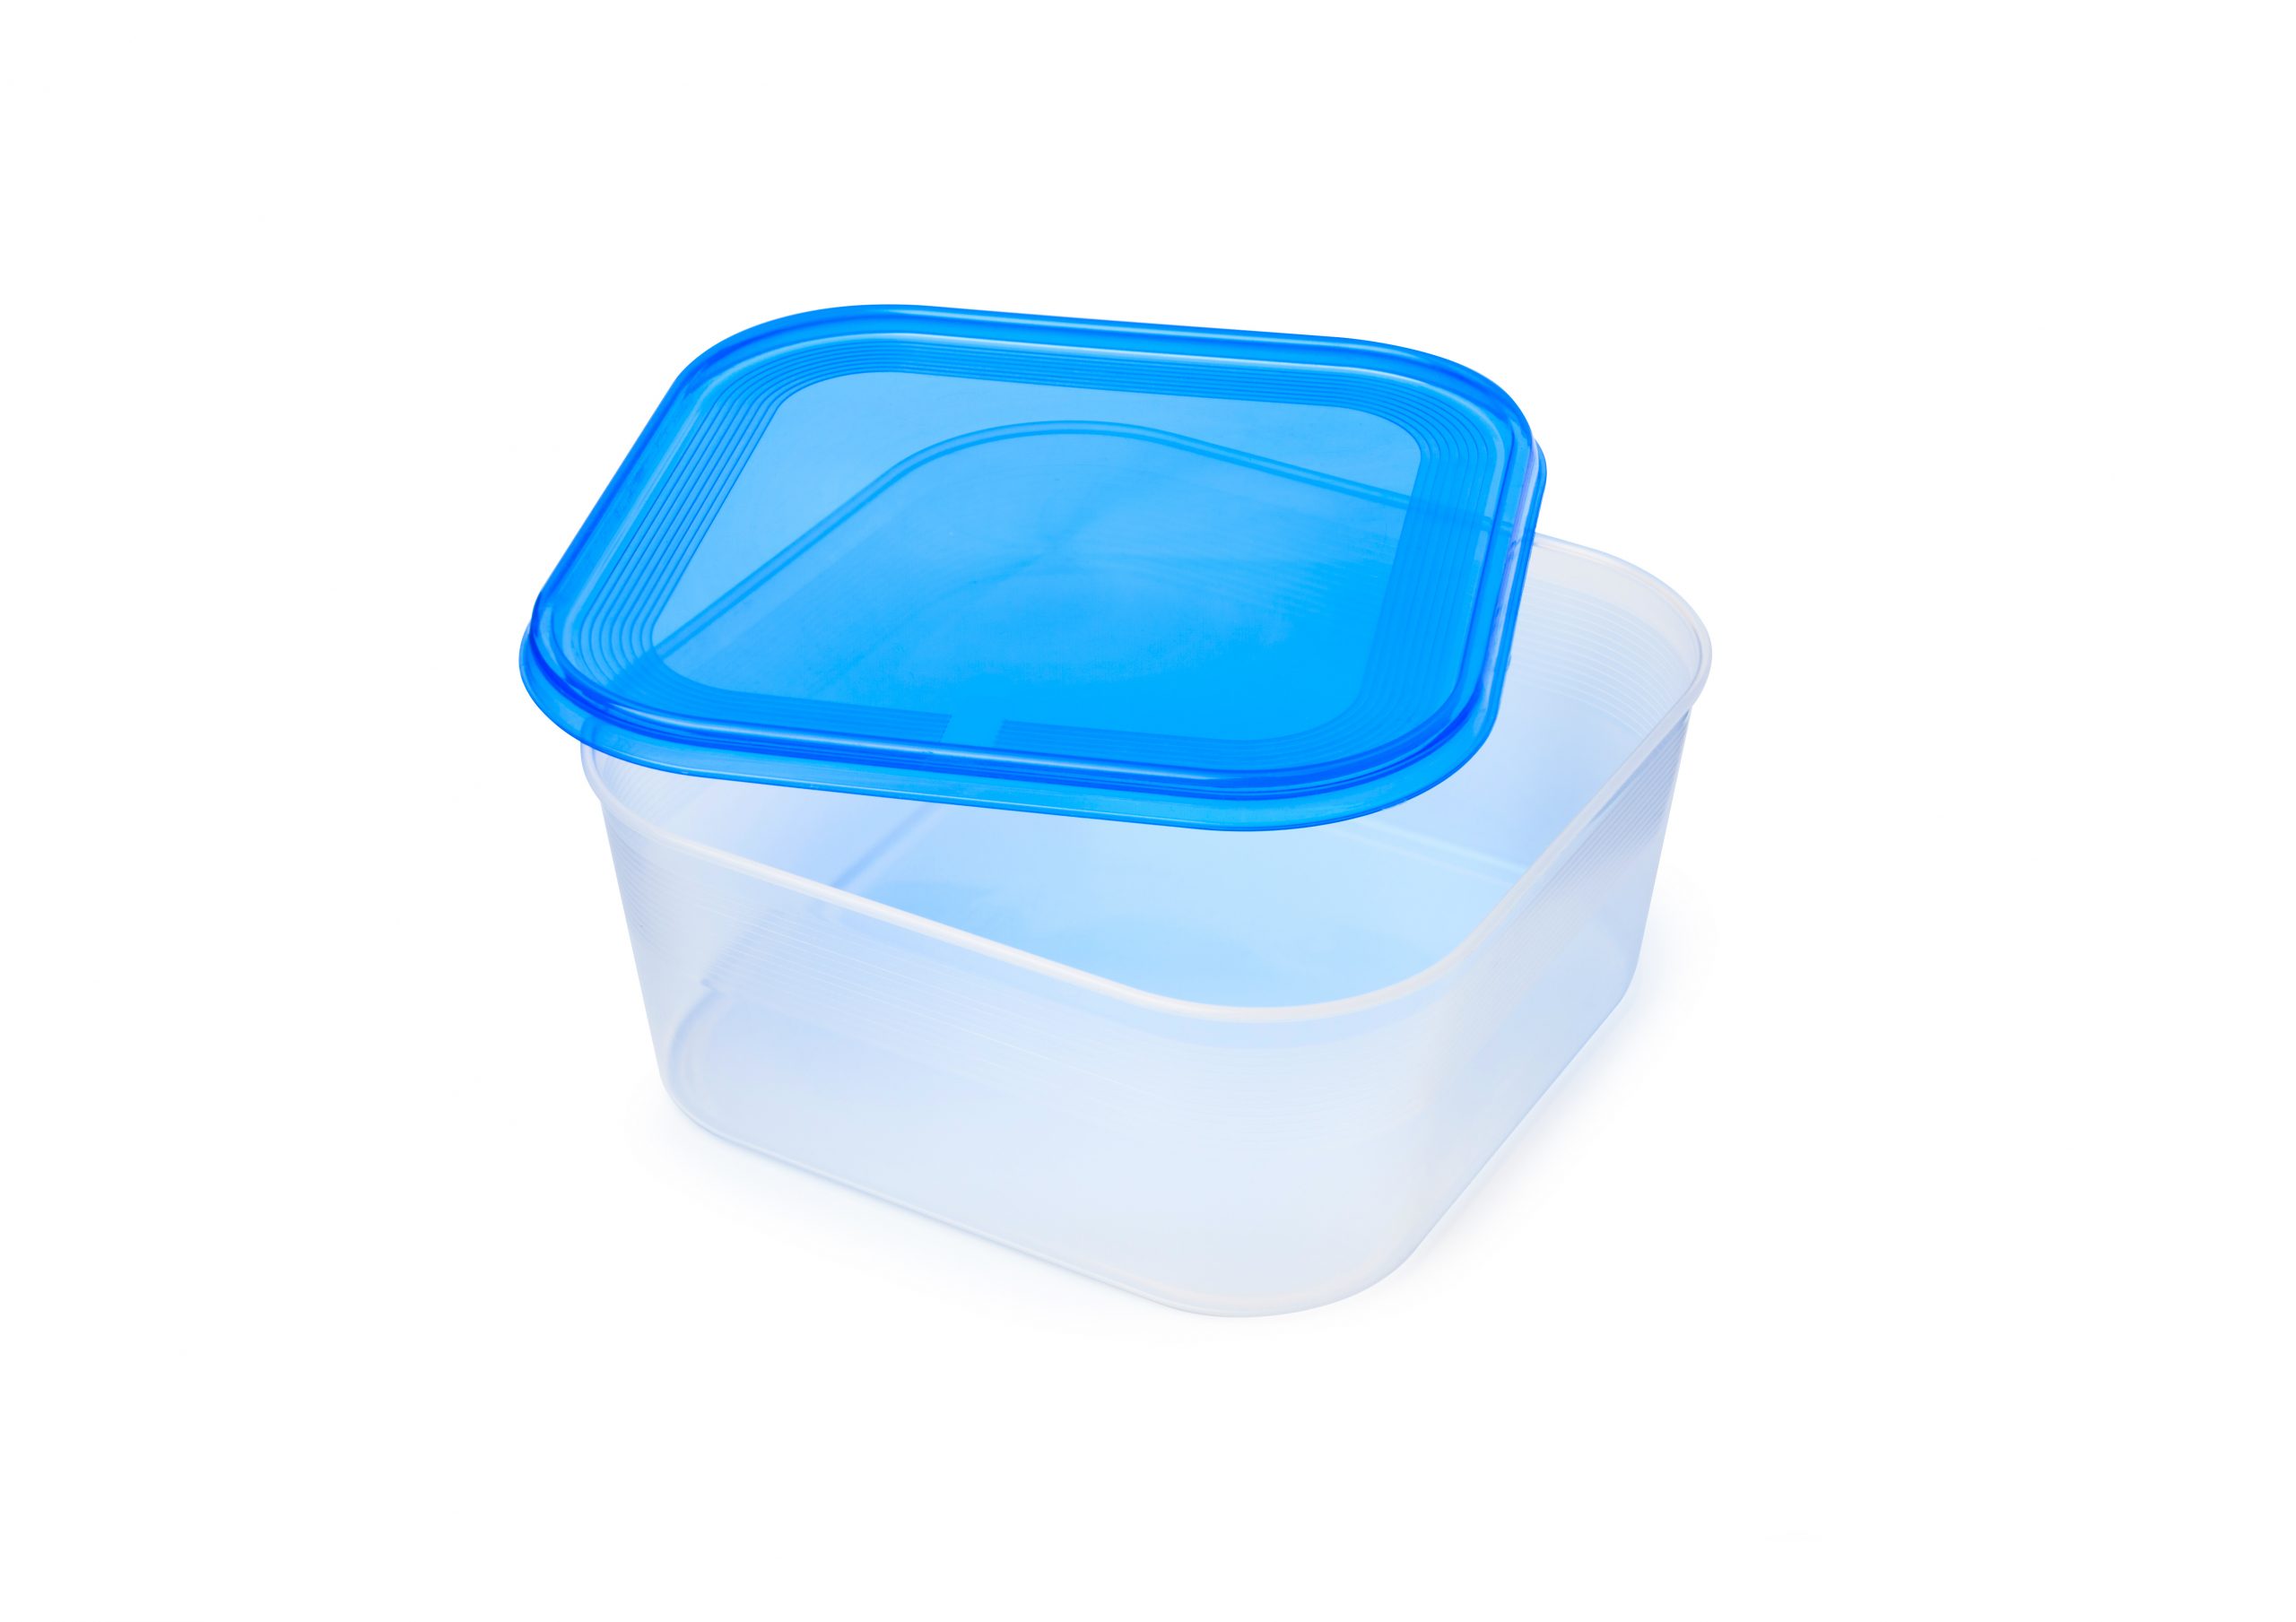 Reusable containers aren't always better for the environment than  disposable ones - new research